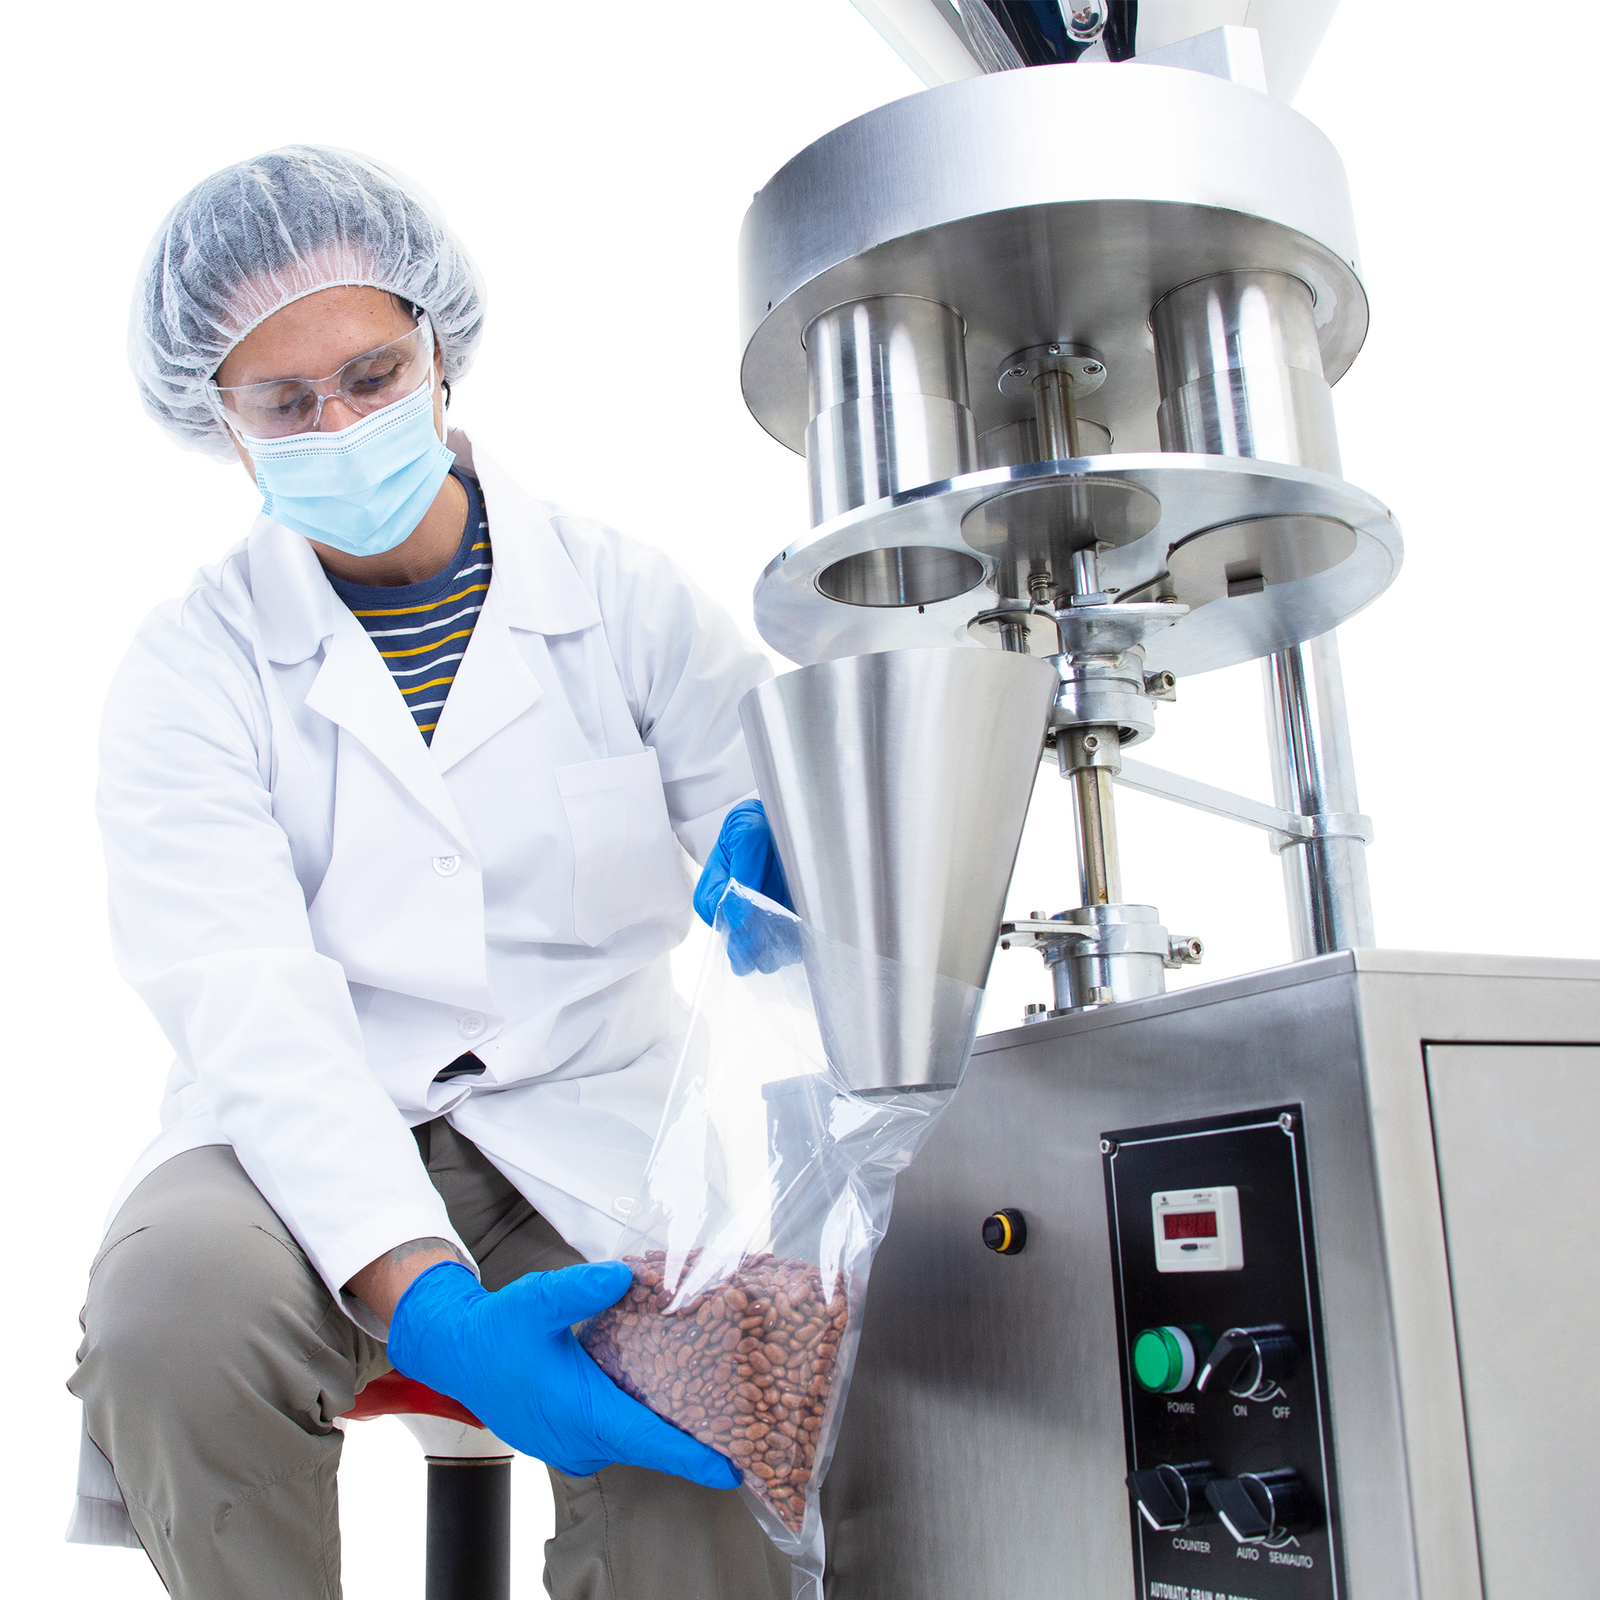 An operator wearing an assortment of personal protection equipment holding a clear plastic bag under the dispensing cone while the gravity volumetric filler releases granular product with accuracy